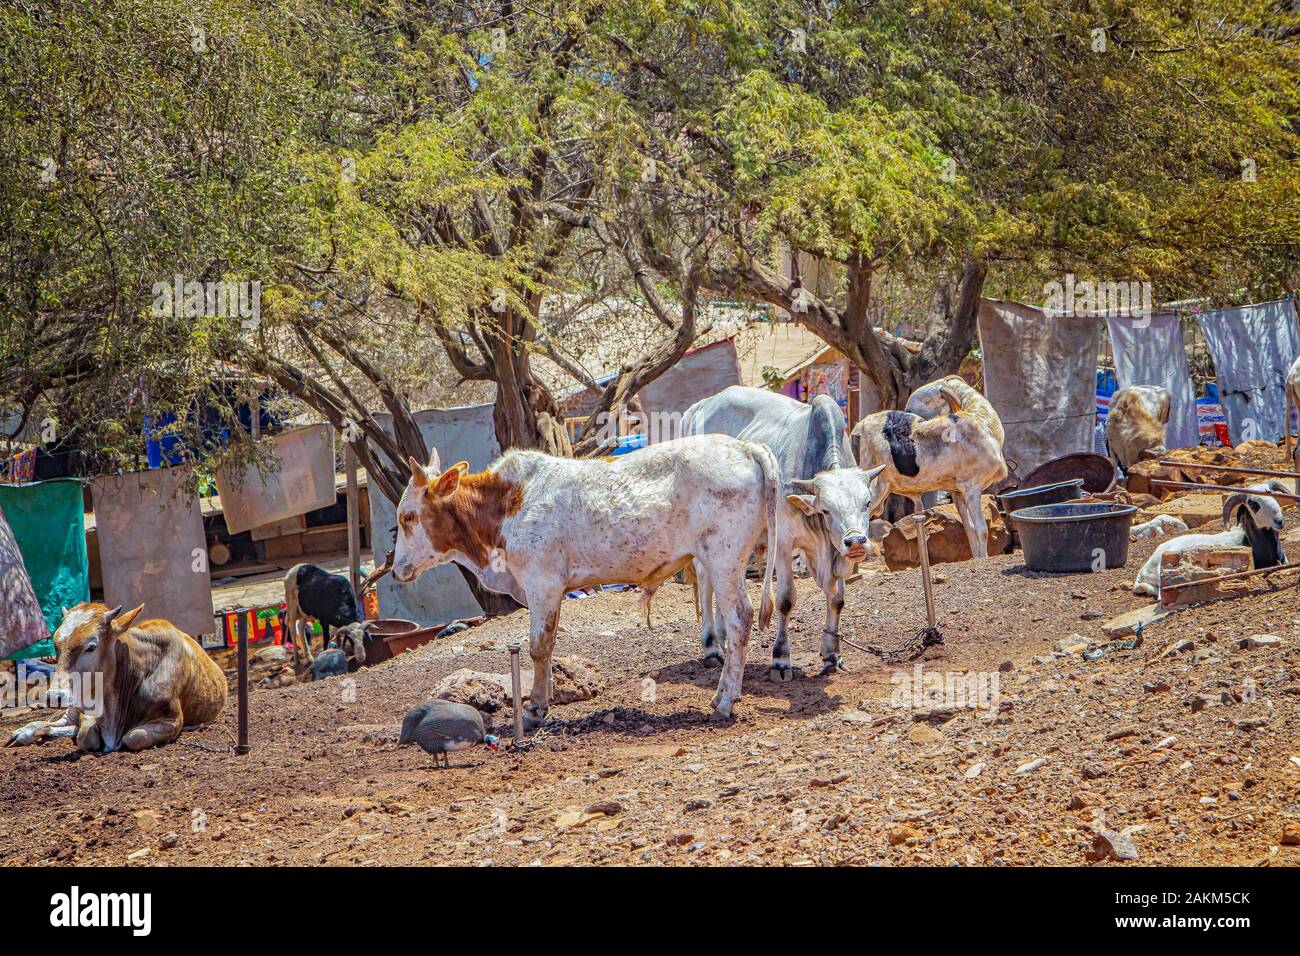 Cows, hens and goats in an African village near Dakar, Senegal. They're on a dirt road near the house. Stock Photo